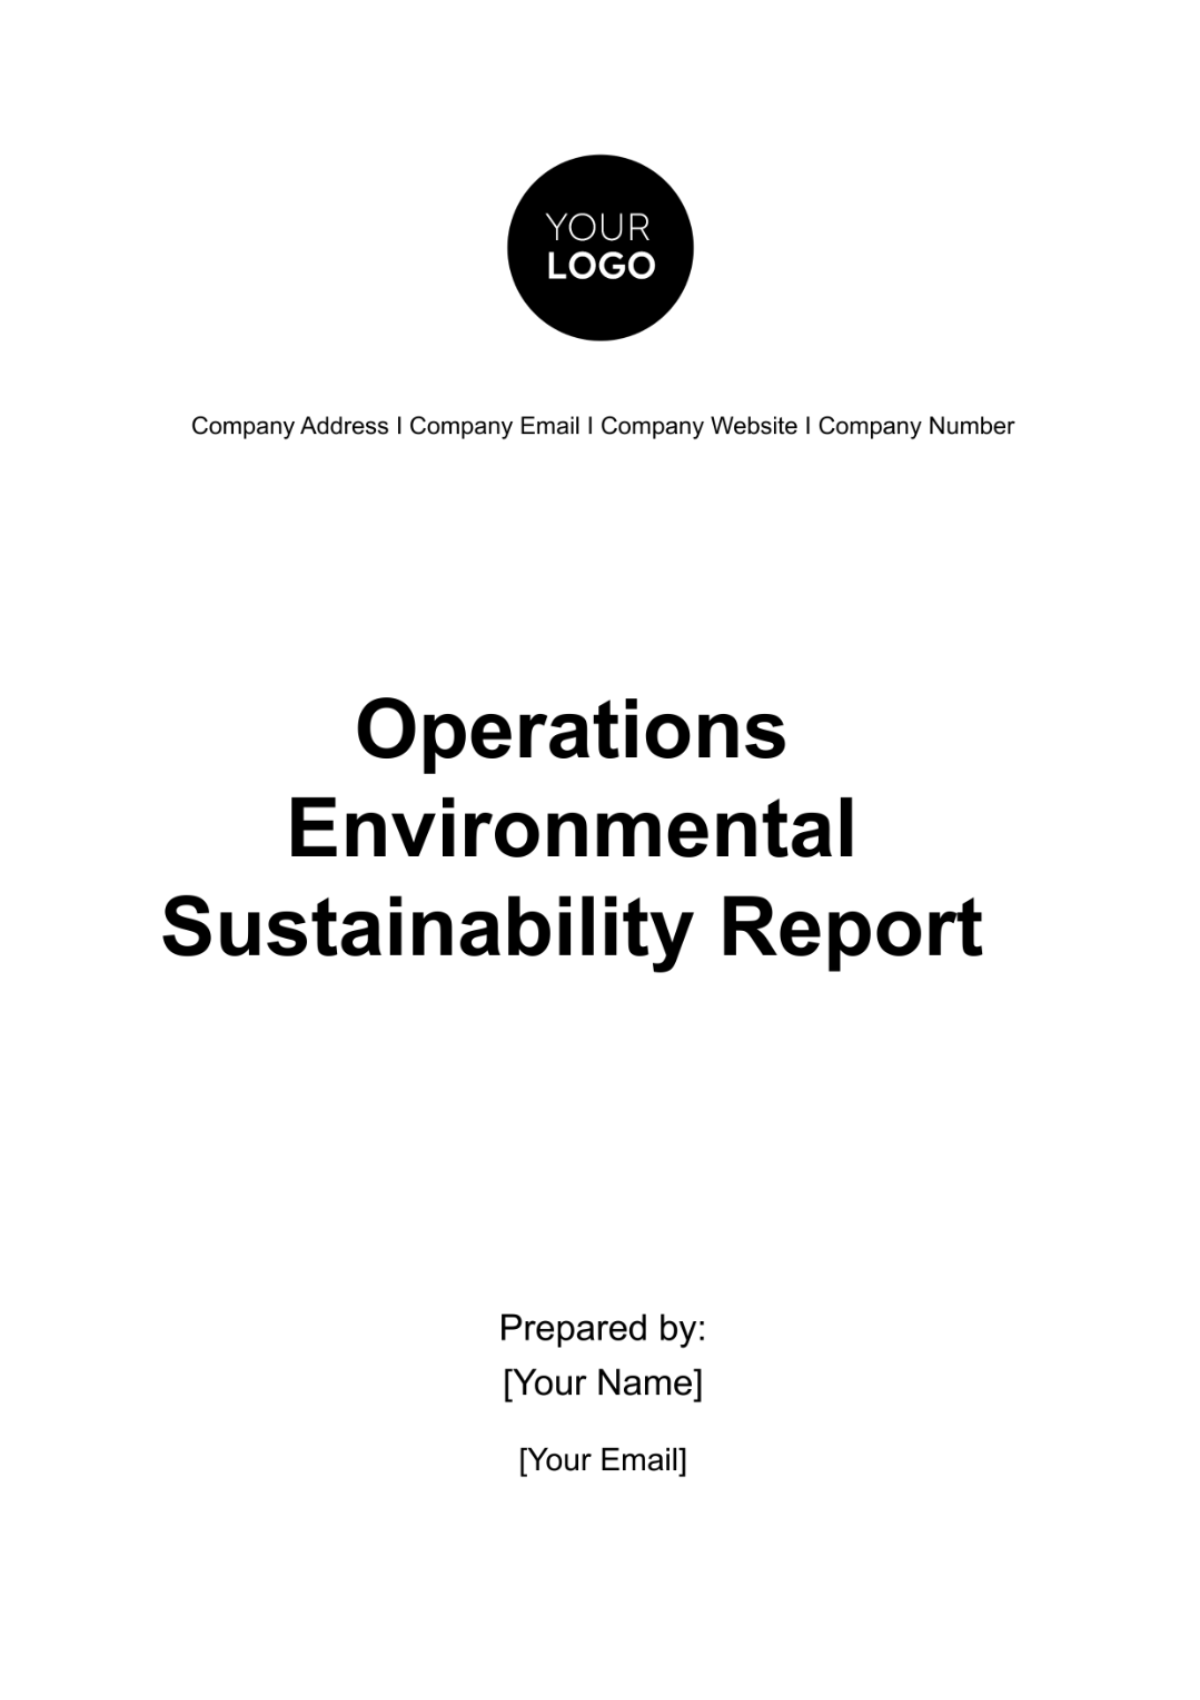 Operations Environmental Sustainability Report Template